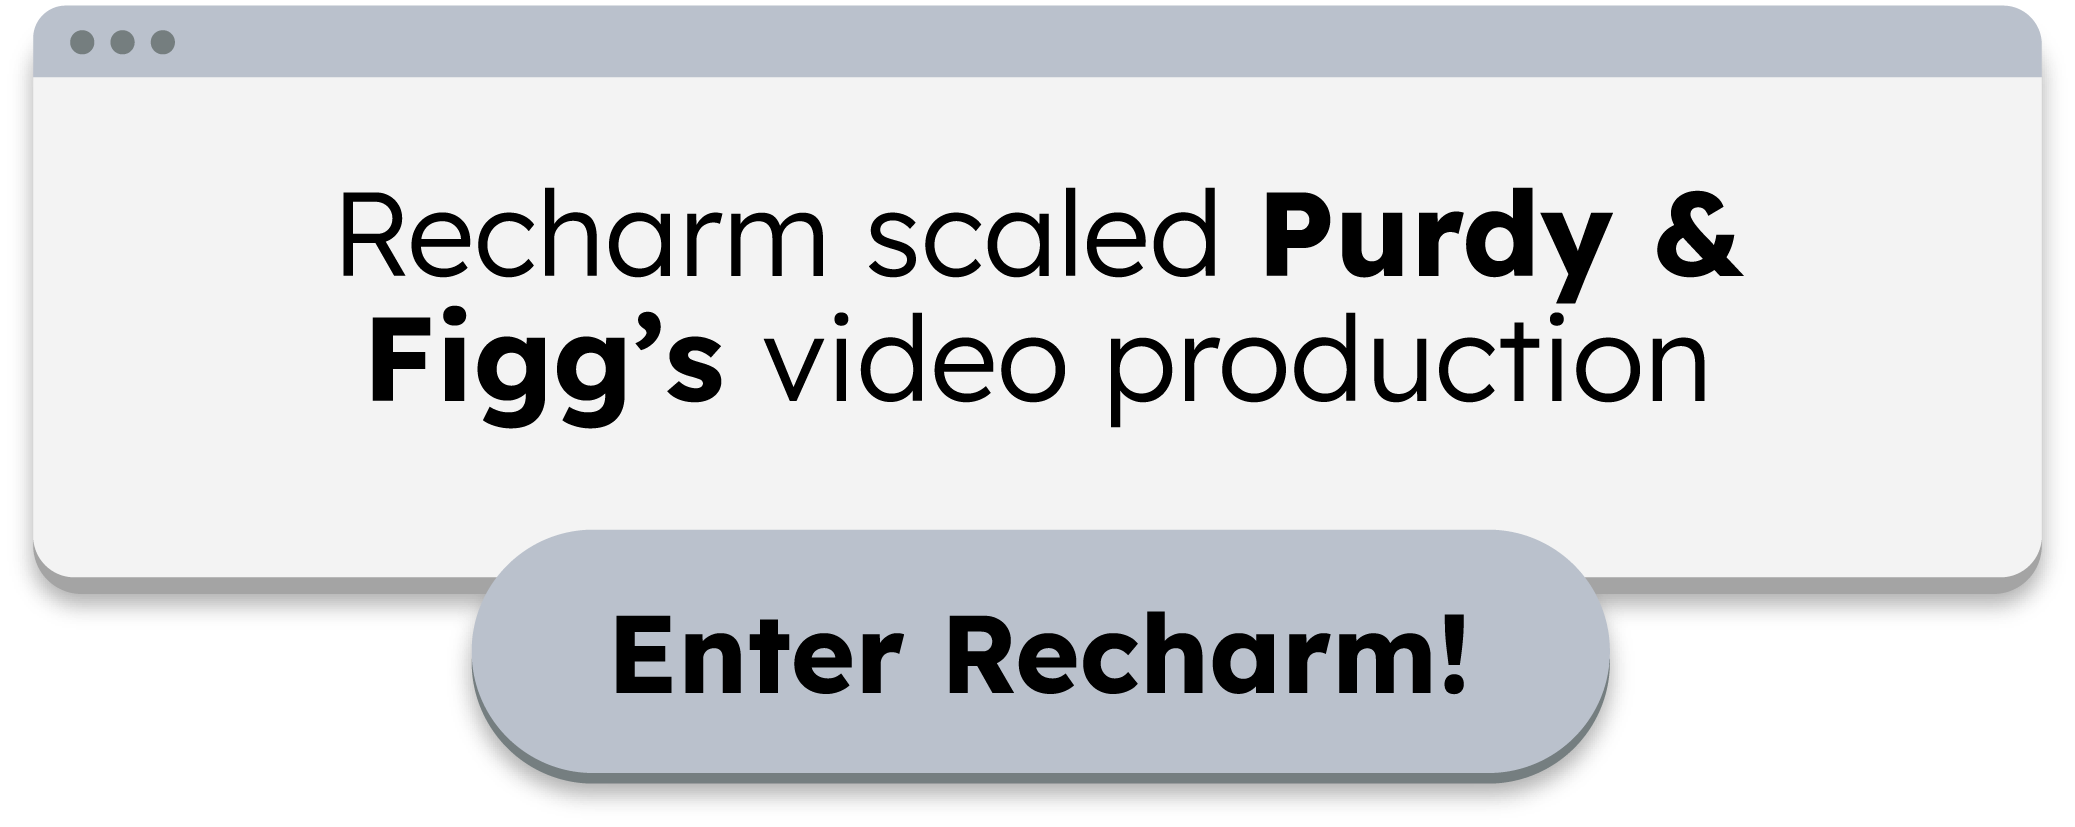 Recharm helps solve Cat Person peroblems